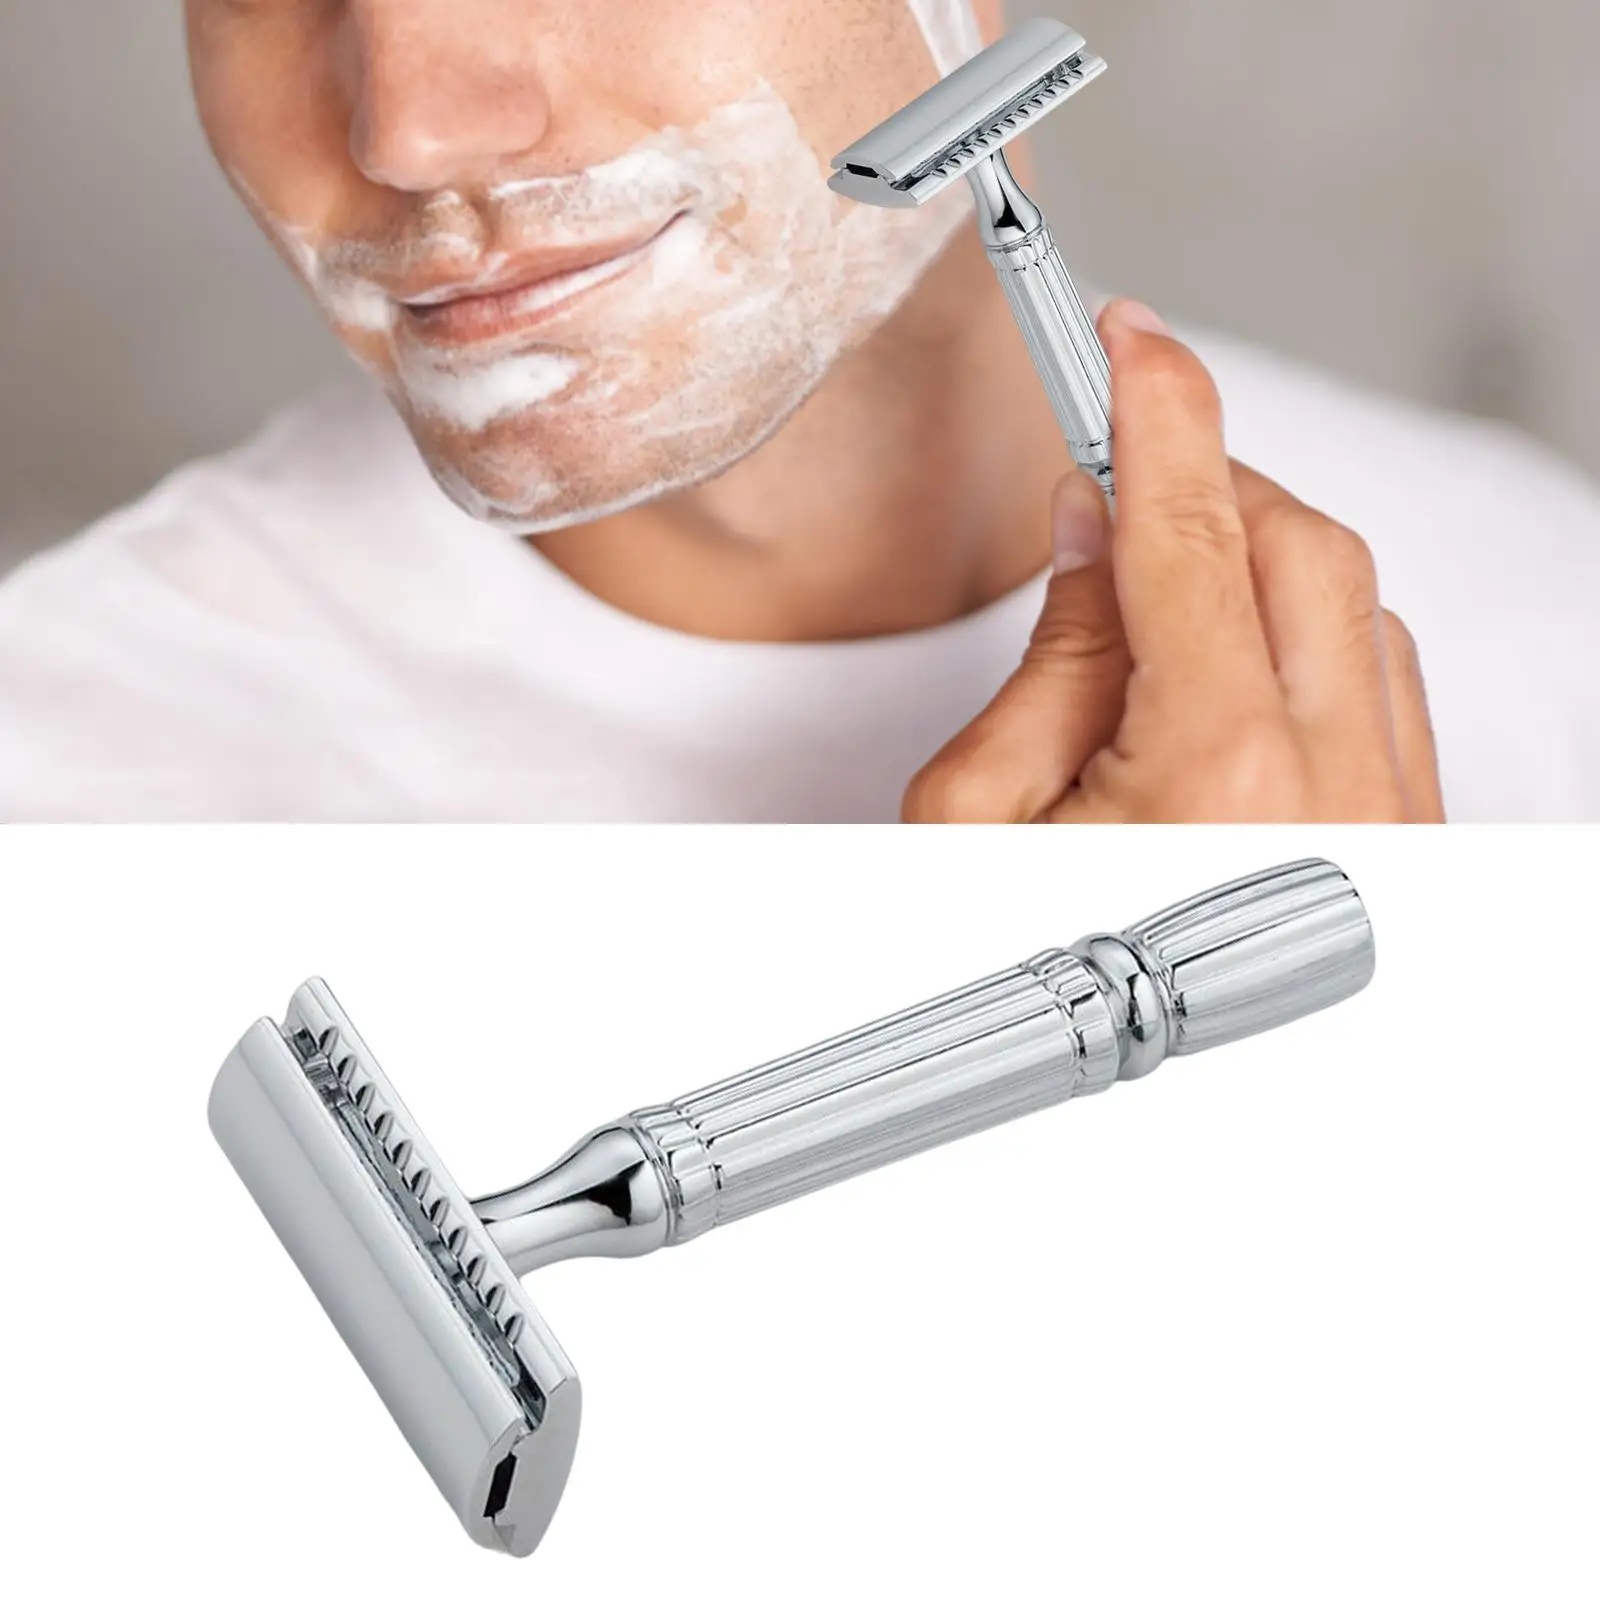 Double Edge Safety Shaving for Home Use with 5Pcs 